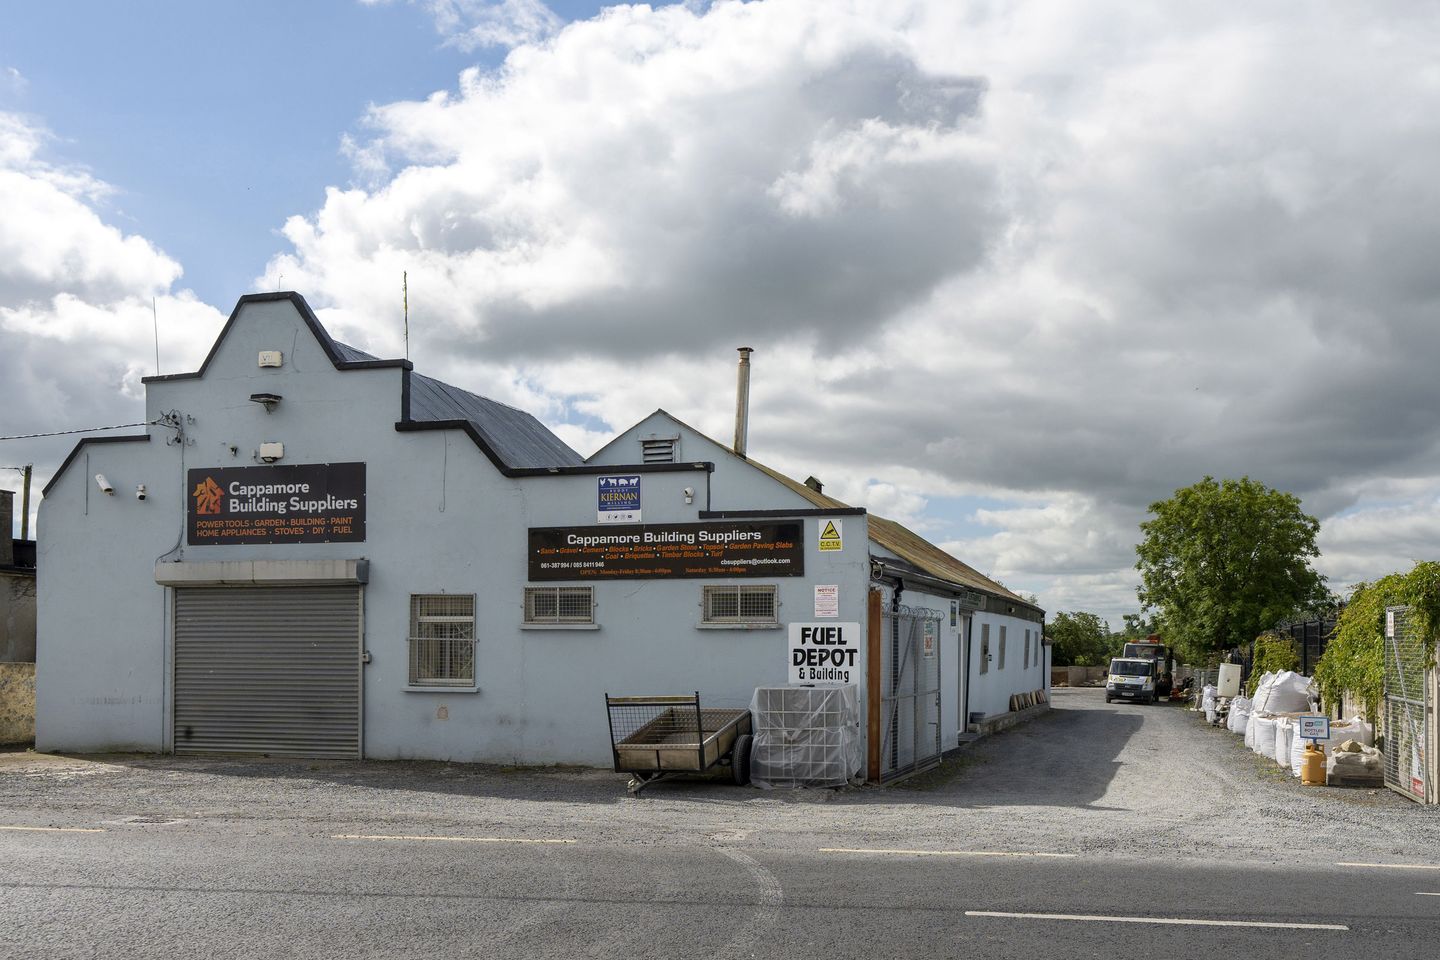 Cappamore Building Supplies, Cappamore, Co. Limerick, V94A4X9